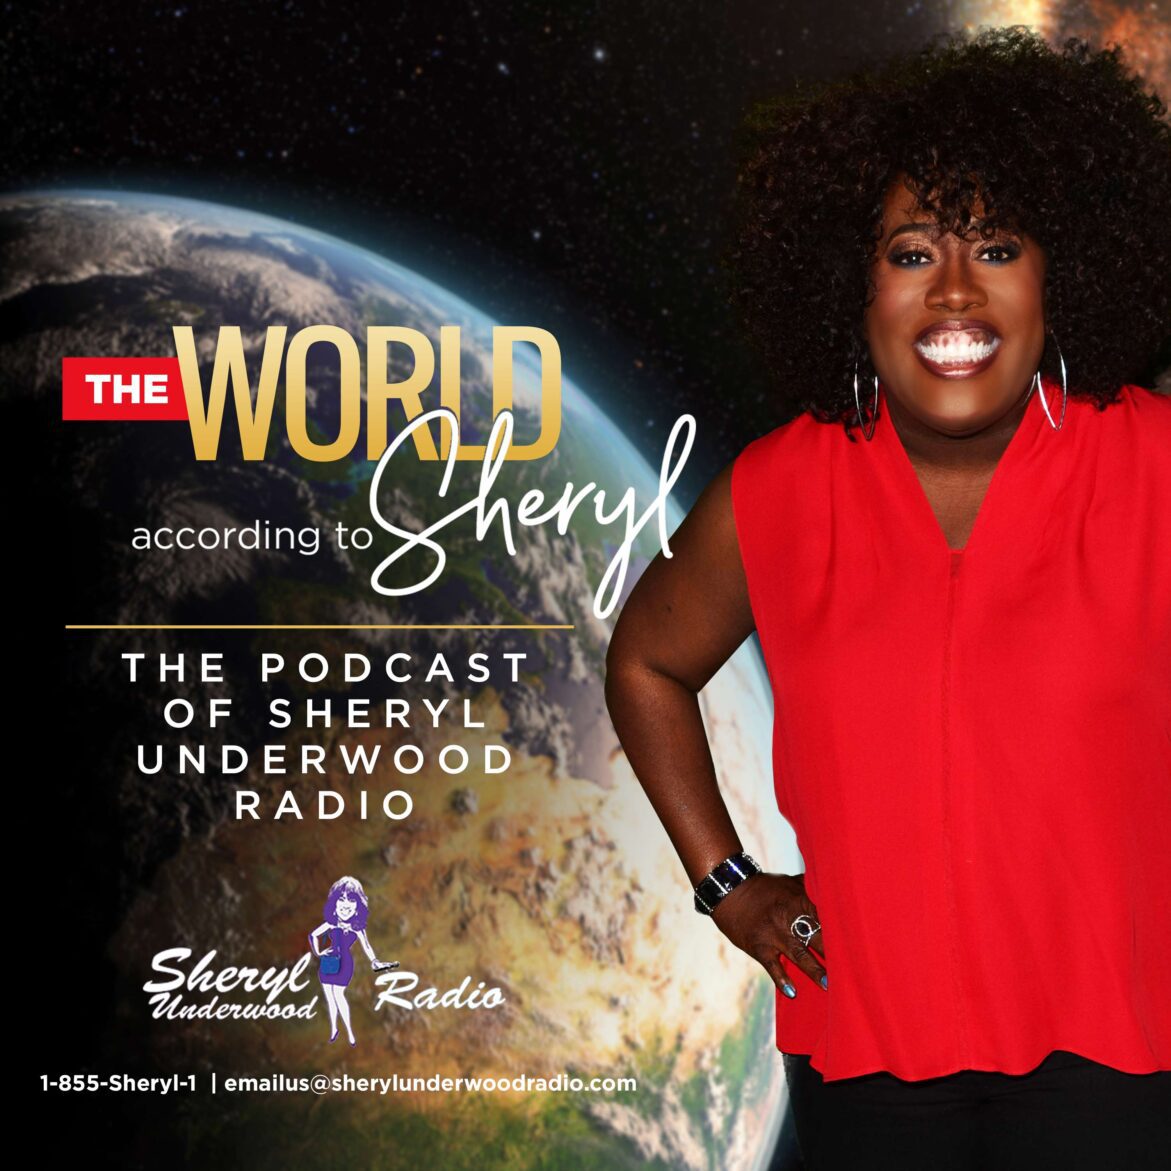 Black Podcasting - Sheryl Underwood Podcast: Keeping it Real with Kyle Erby "When She Stops"